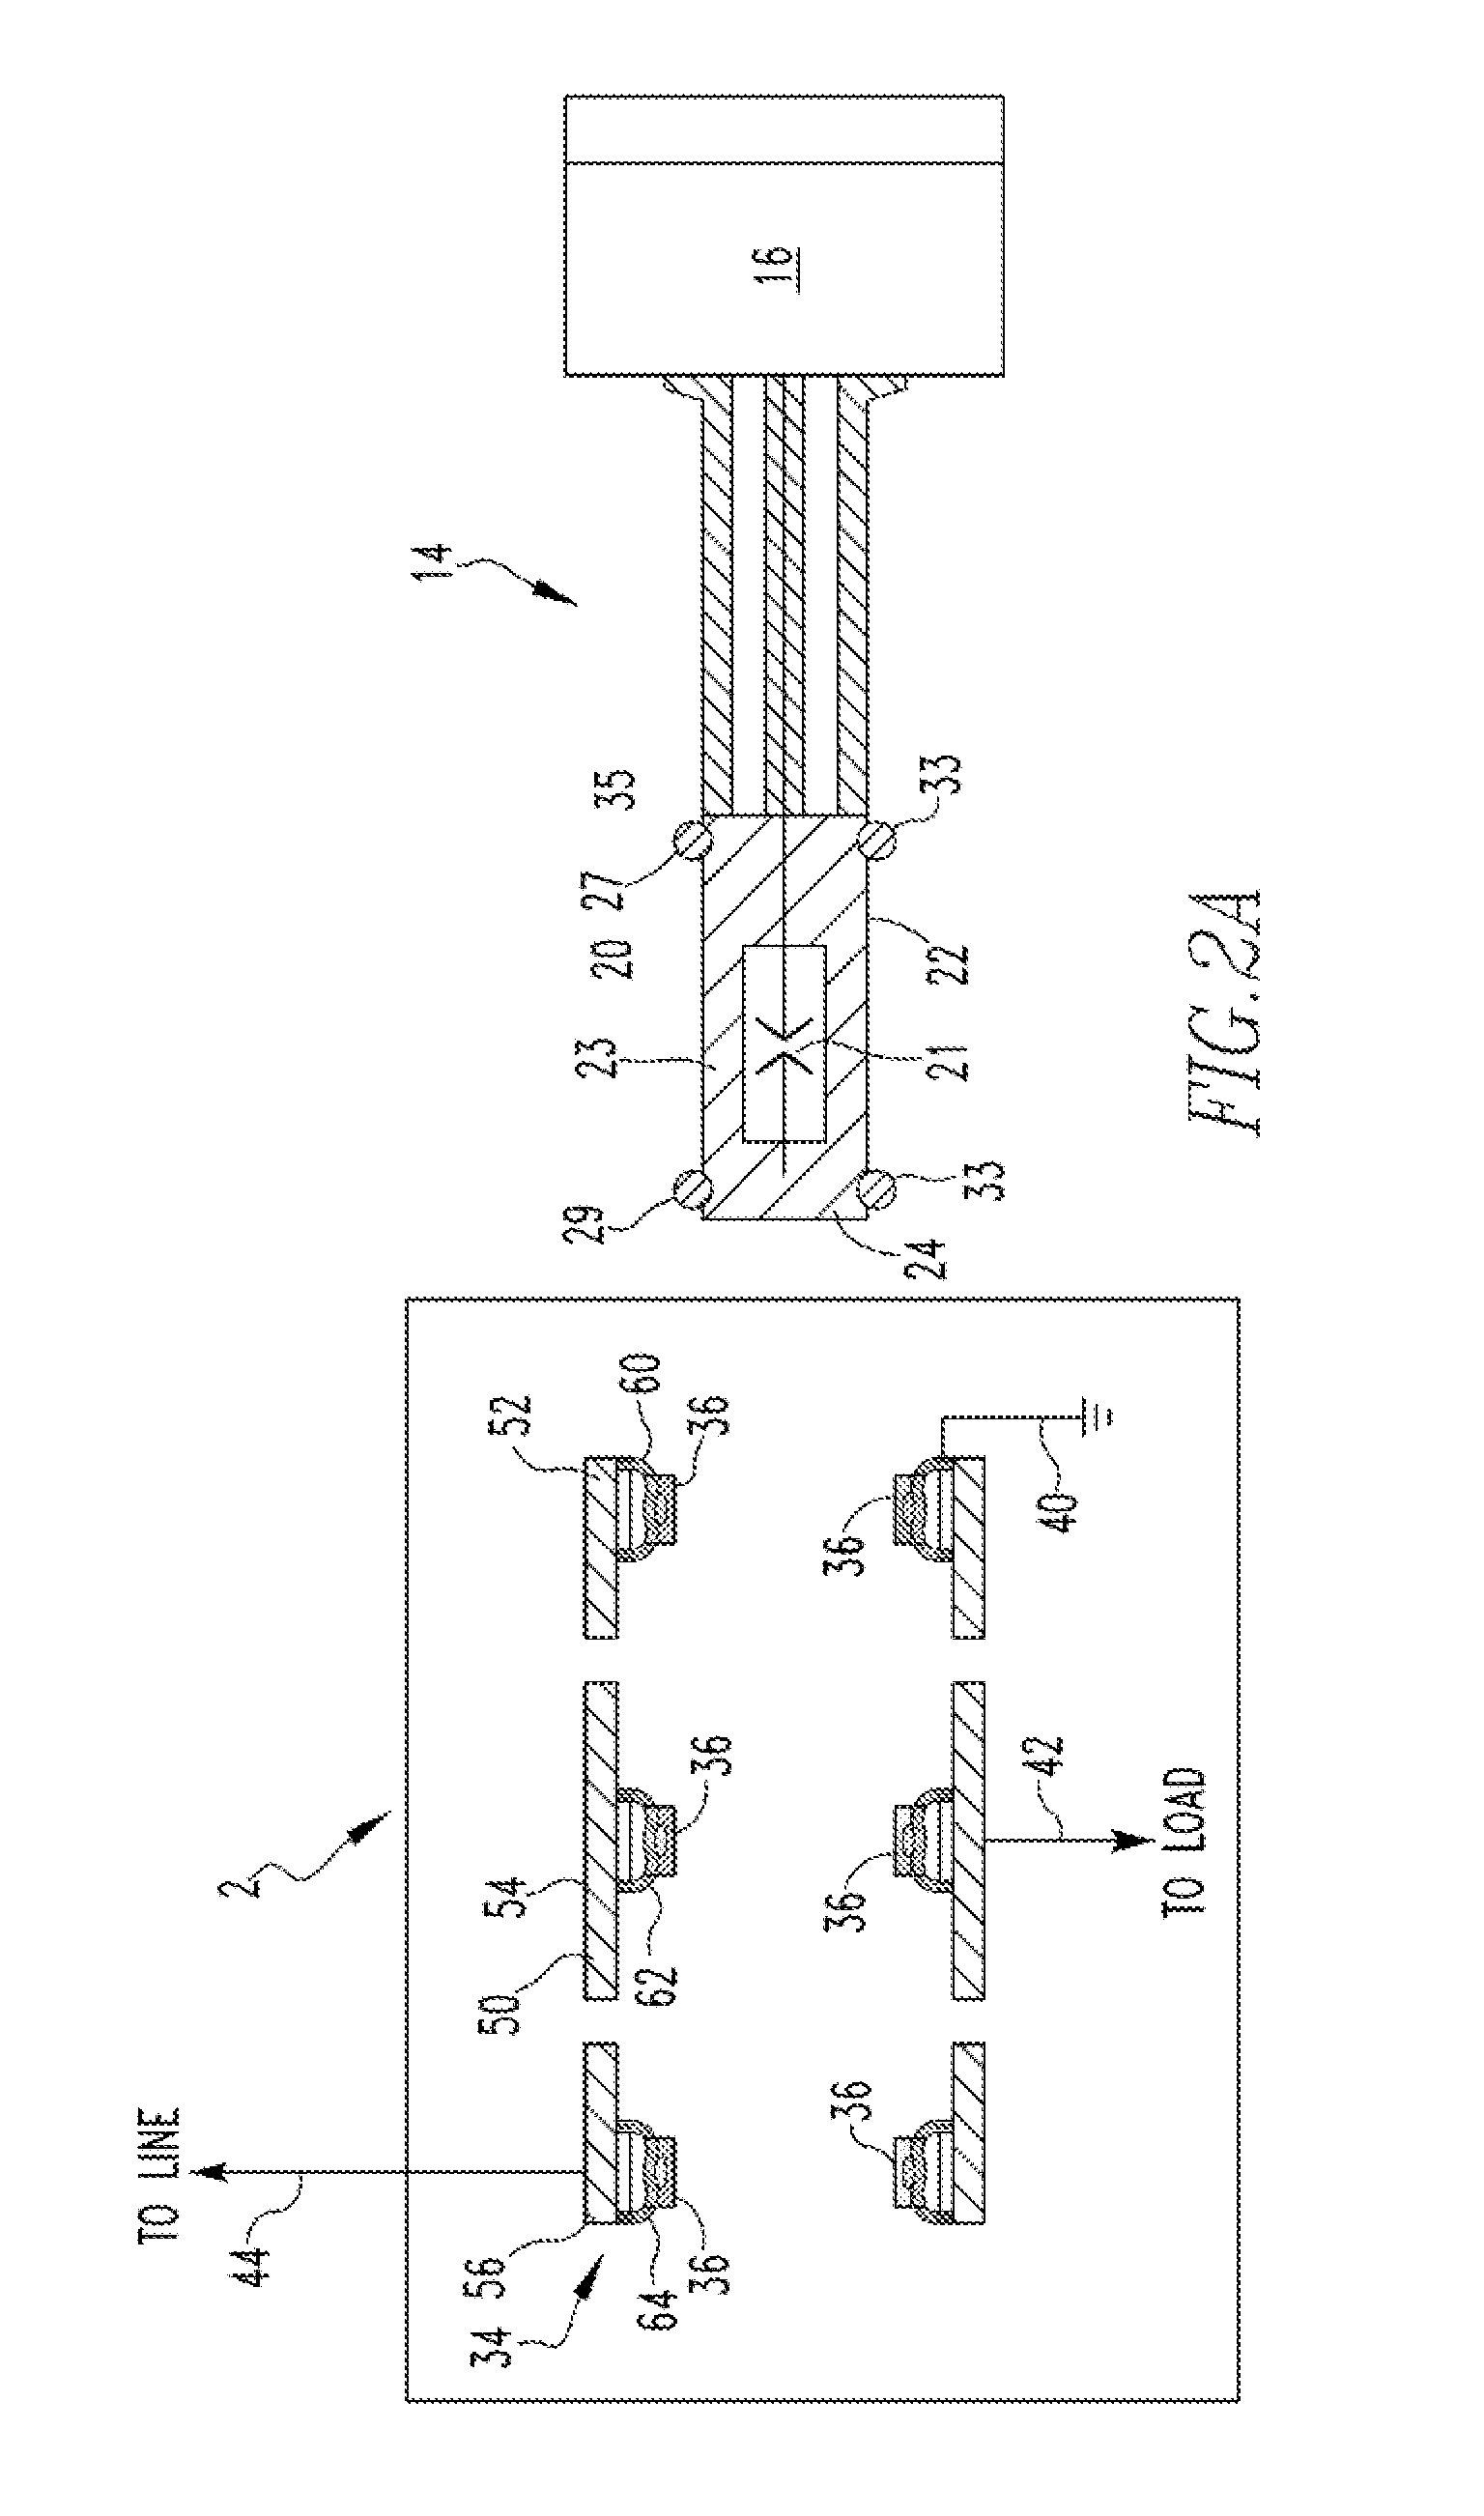 Floating contact assembly for switchgear